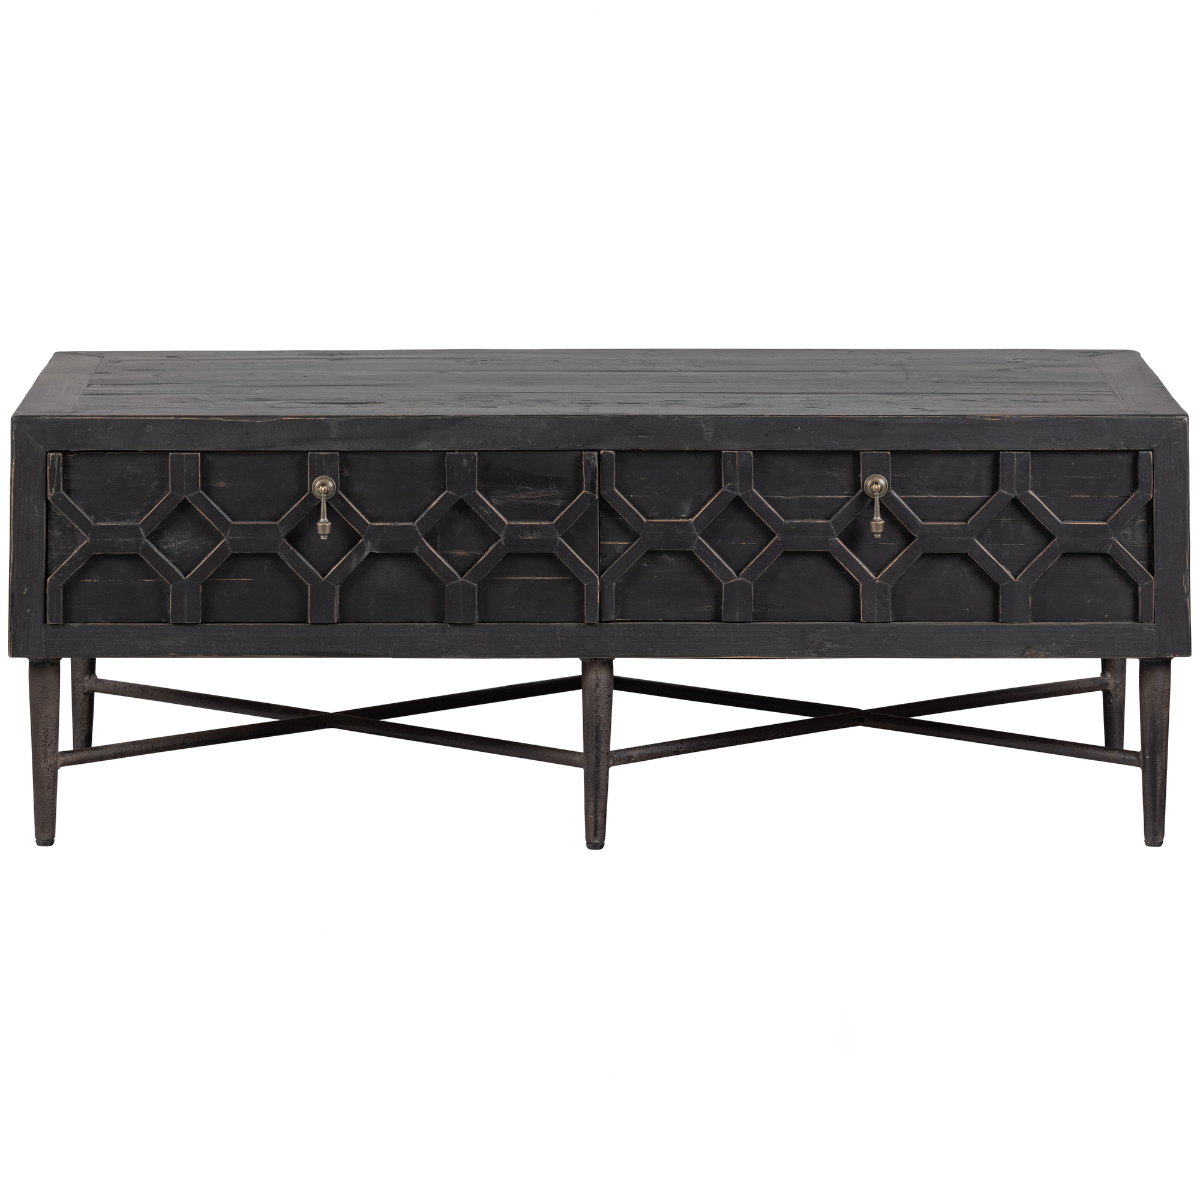 Bequest Black Wood Coffee Table